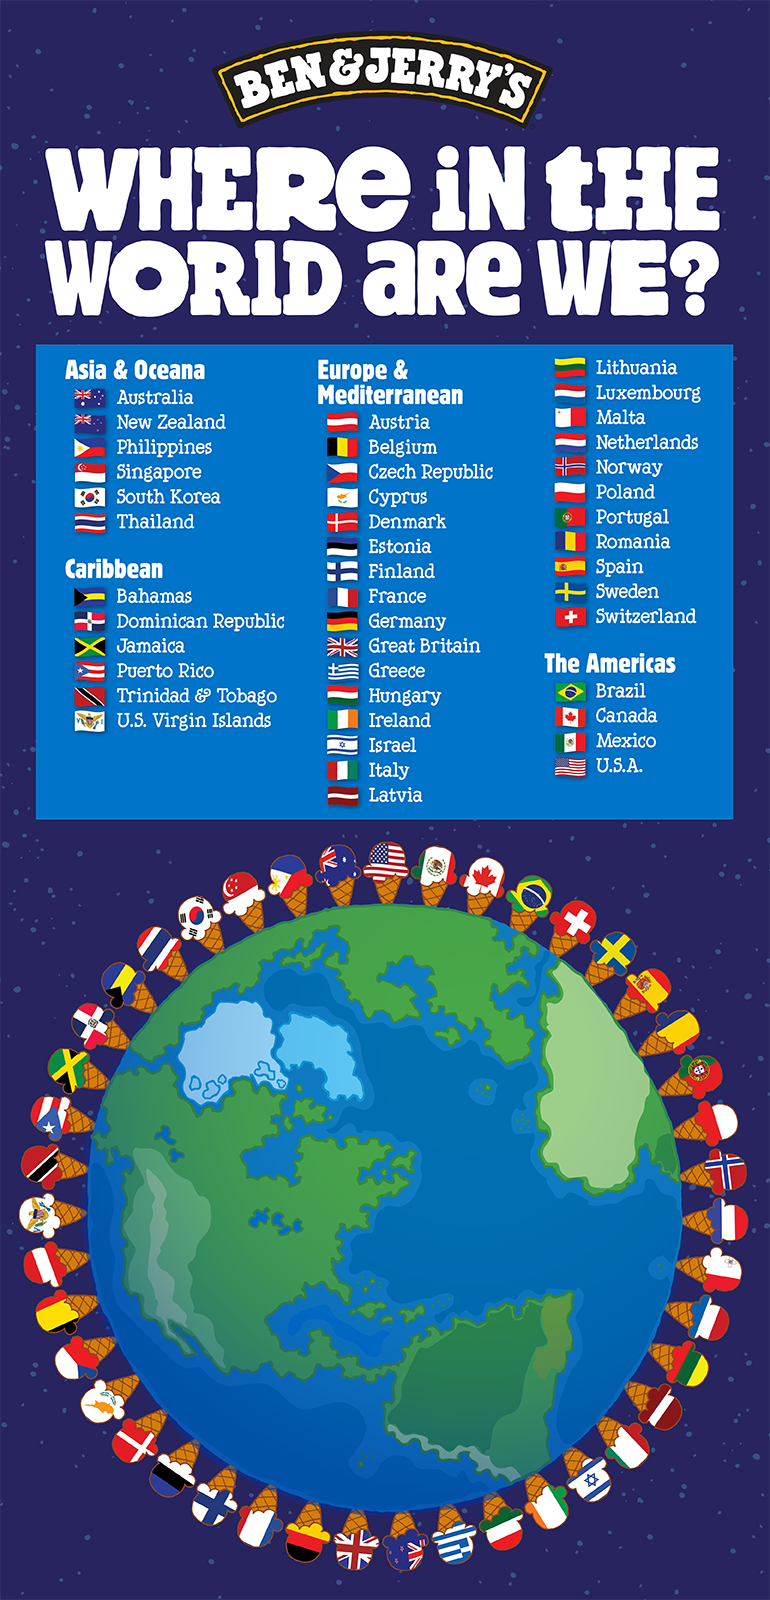 Infographic listing the countries that Ben & Jerry's does business.